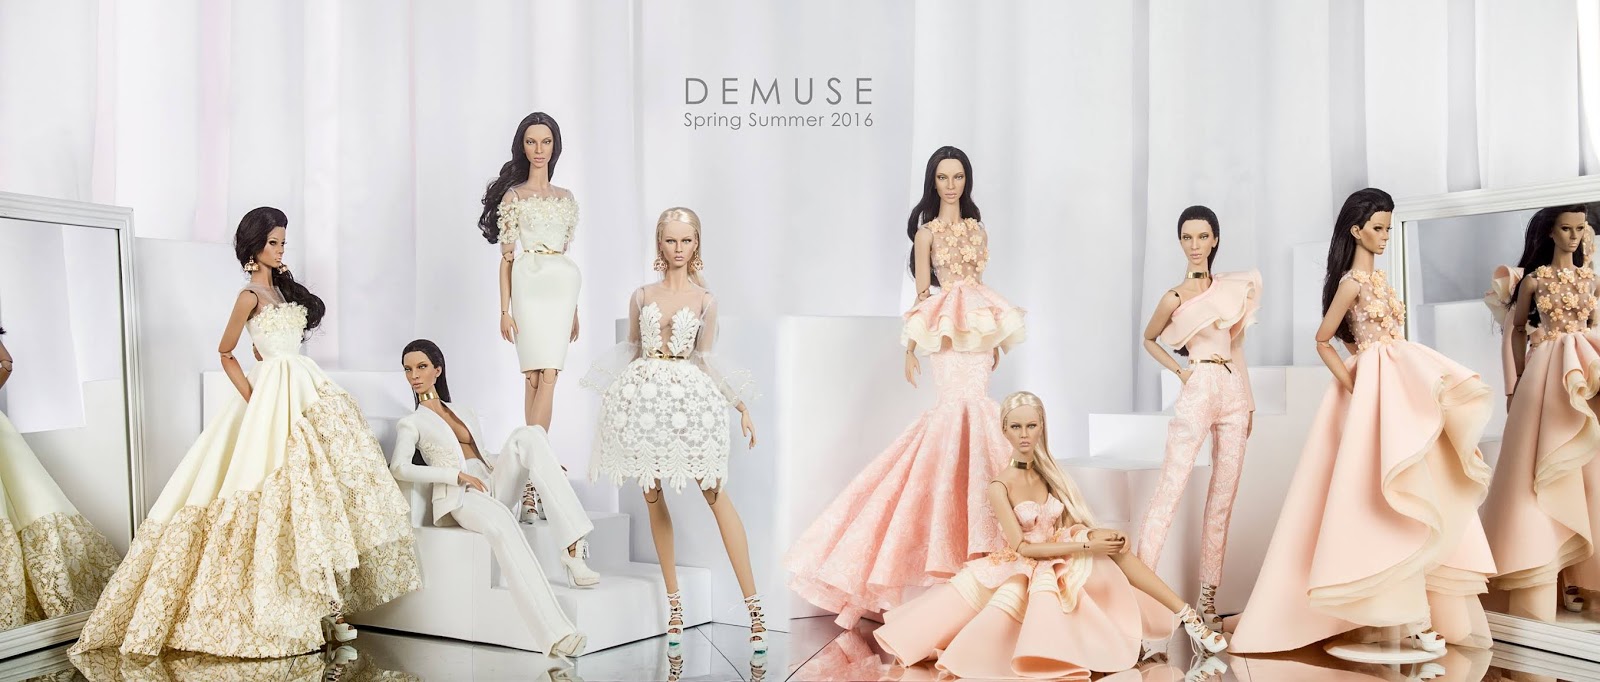 where to buy a demuse doll